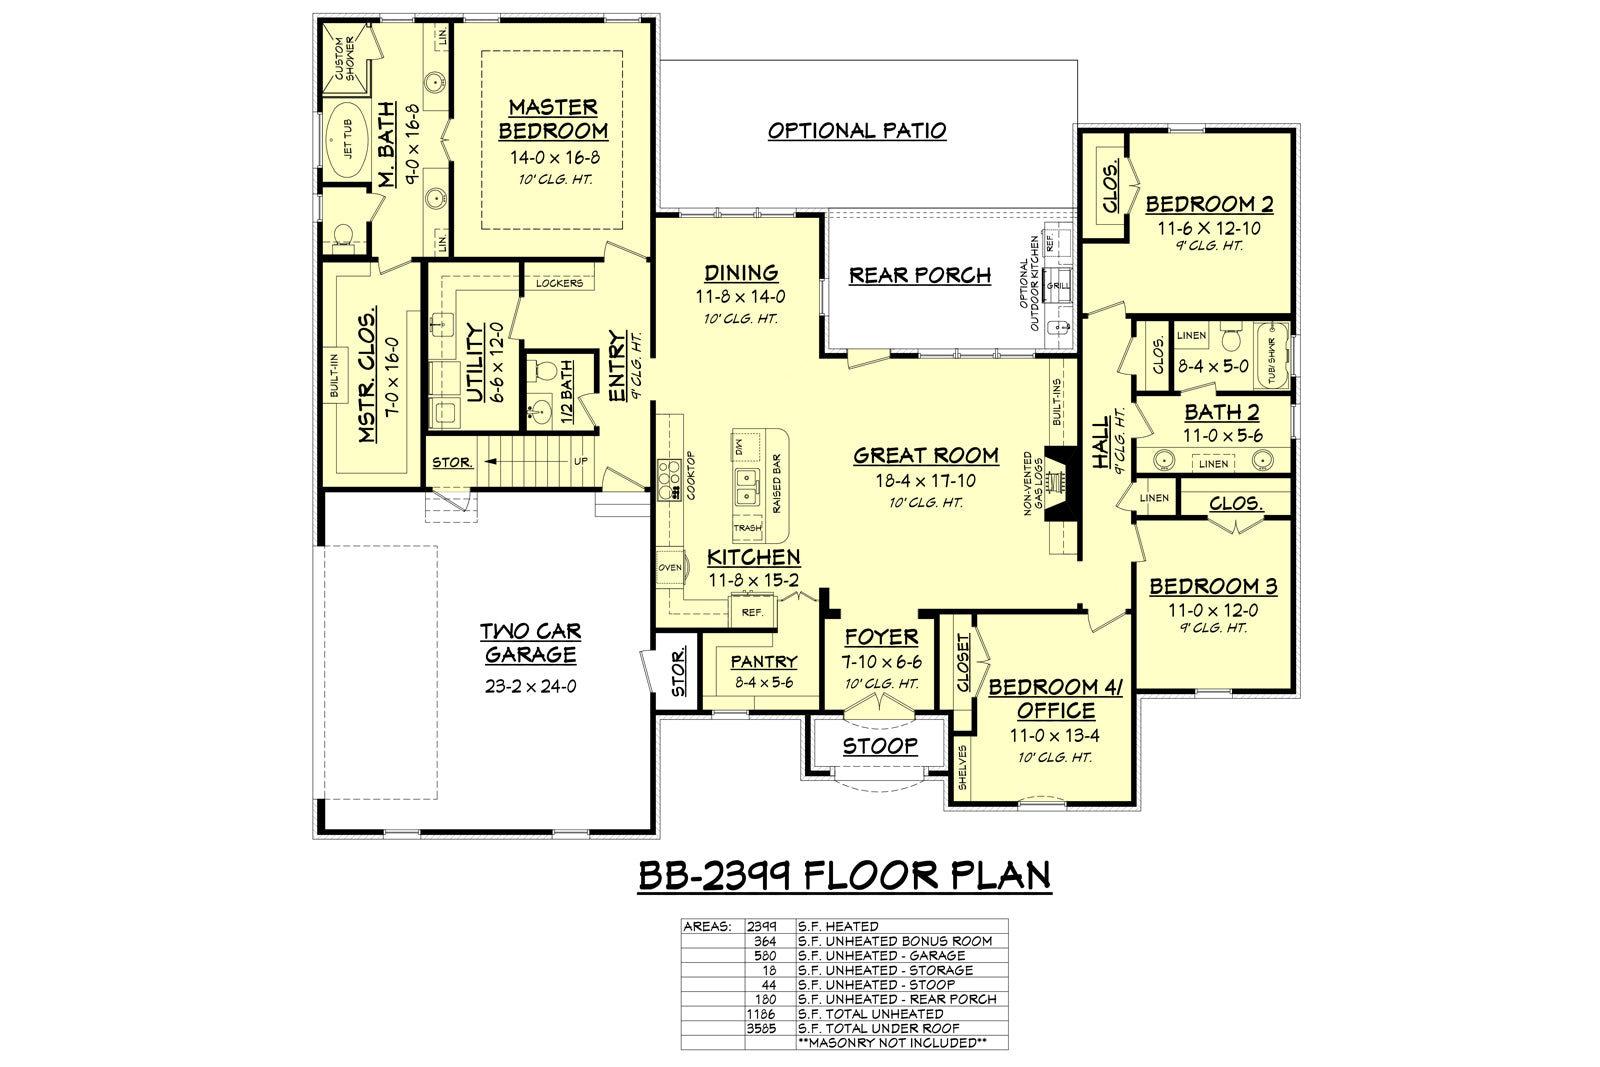 House Plan 2399 From House Plan Zone is Now Available!!!